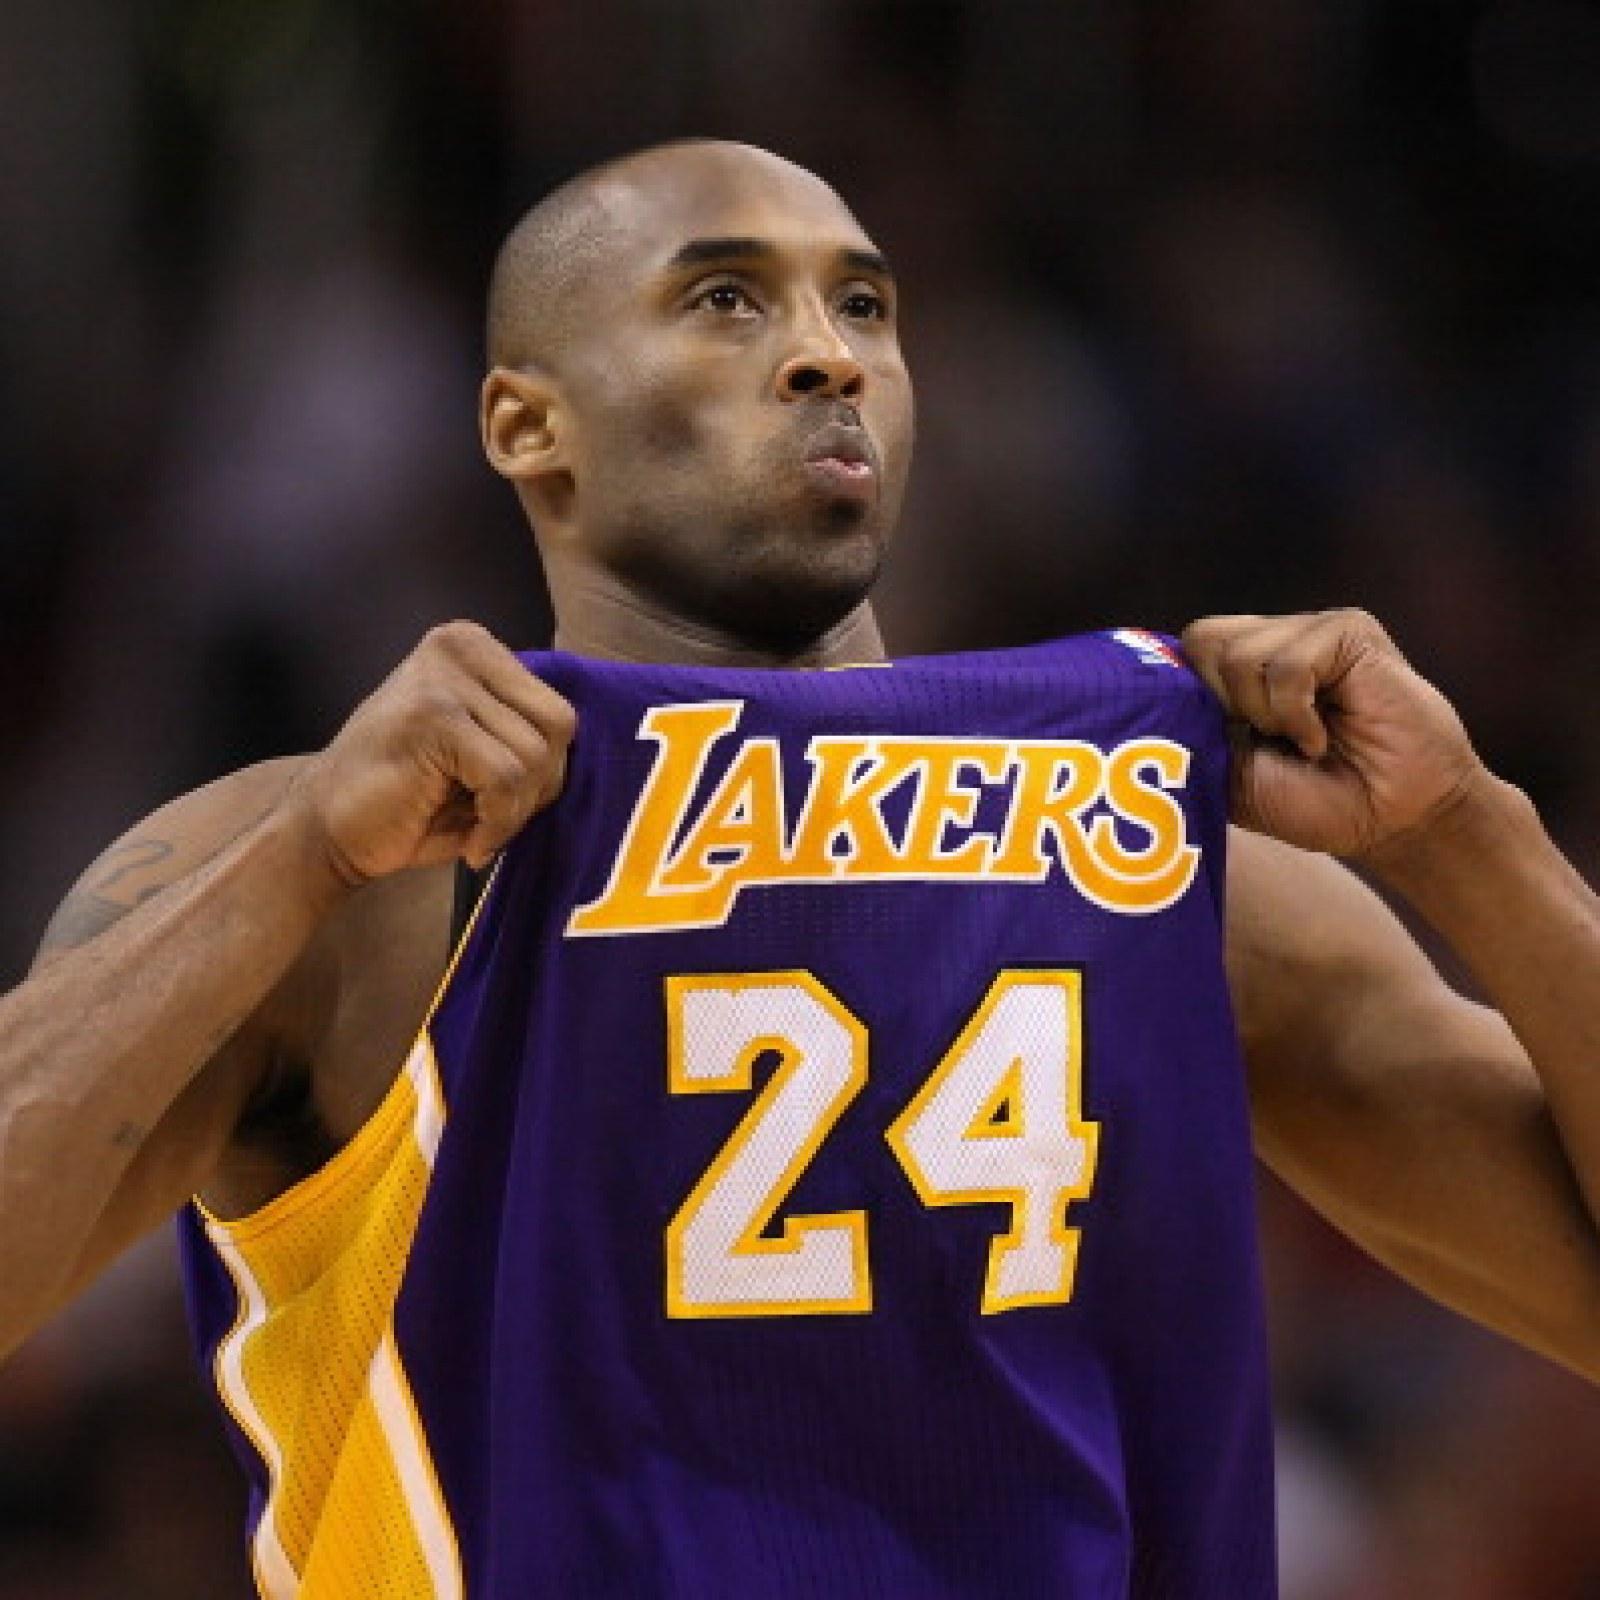 Memorable Kobe Bryant Quotes and Mamba's Unforgettable Basketball Accomplishments